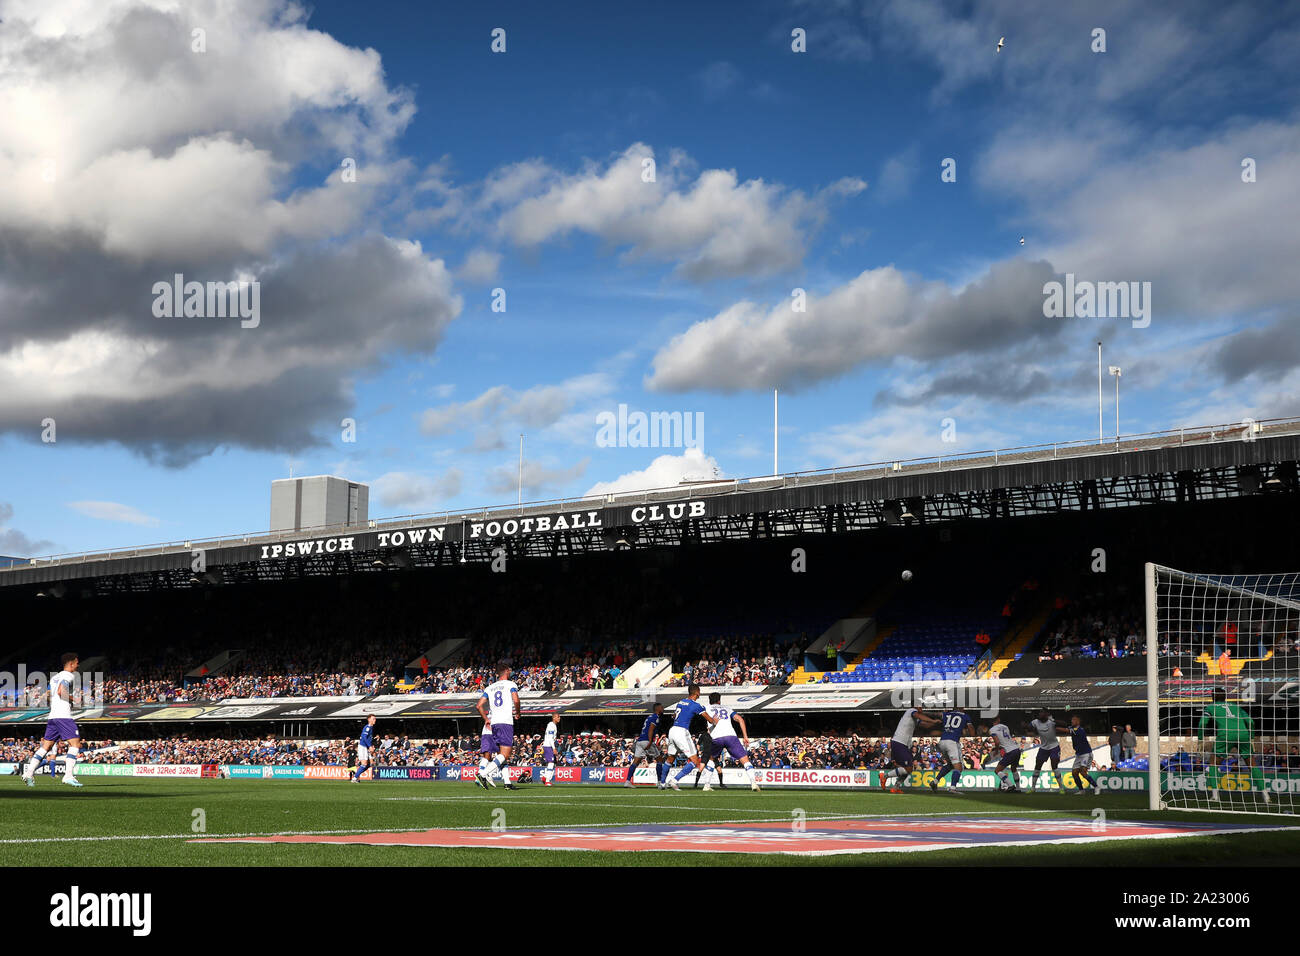 General view of Portman Road during the match - Ipswich Town v Tranmere Rovers, Sky Bet League One, Portman Road, Ipswich, UK - 28th September 2019  Editorial Use Only - DataCo restrictions apply Stock Photo